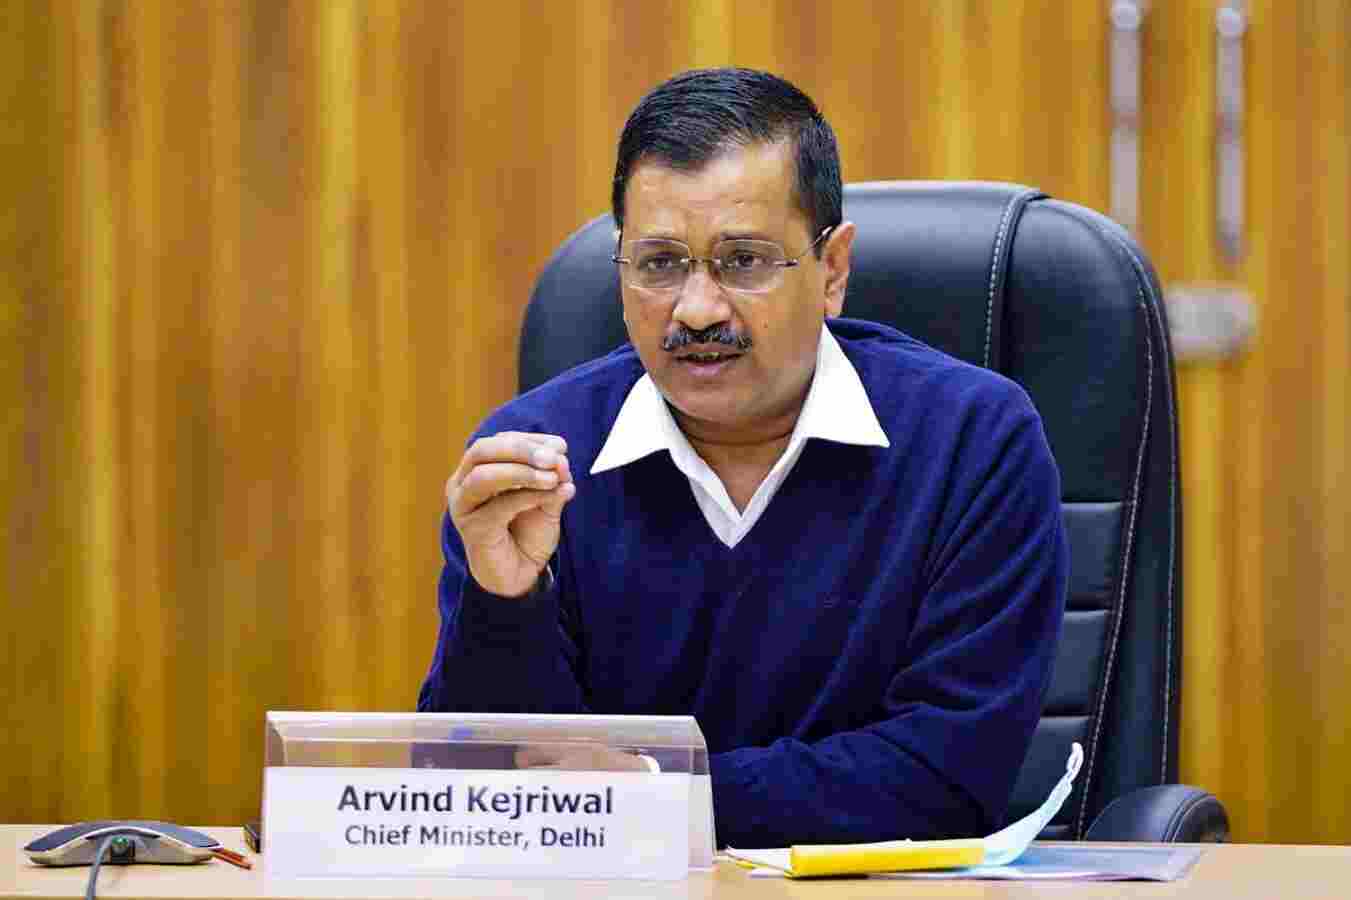 A great relief for students, parents: Arvind Kejriwal